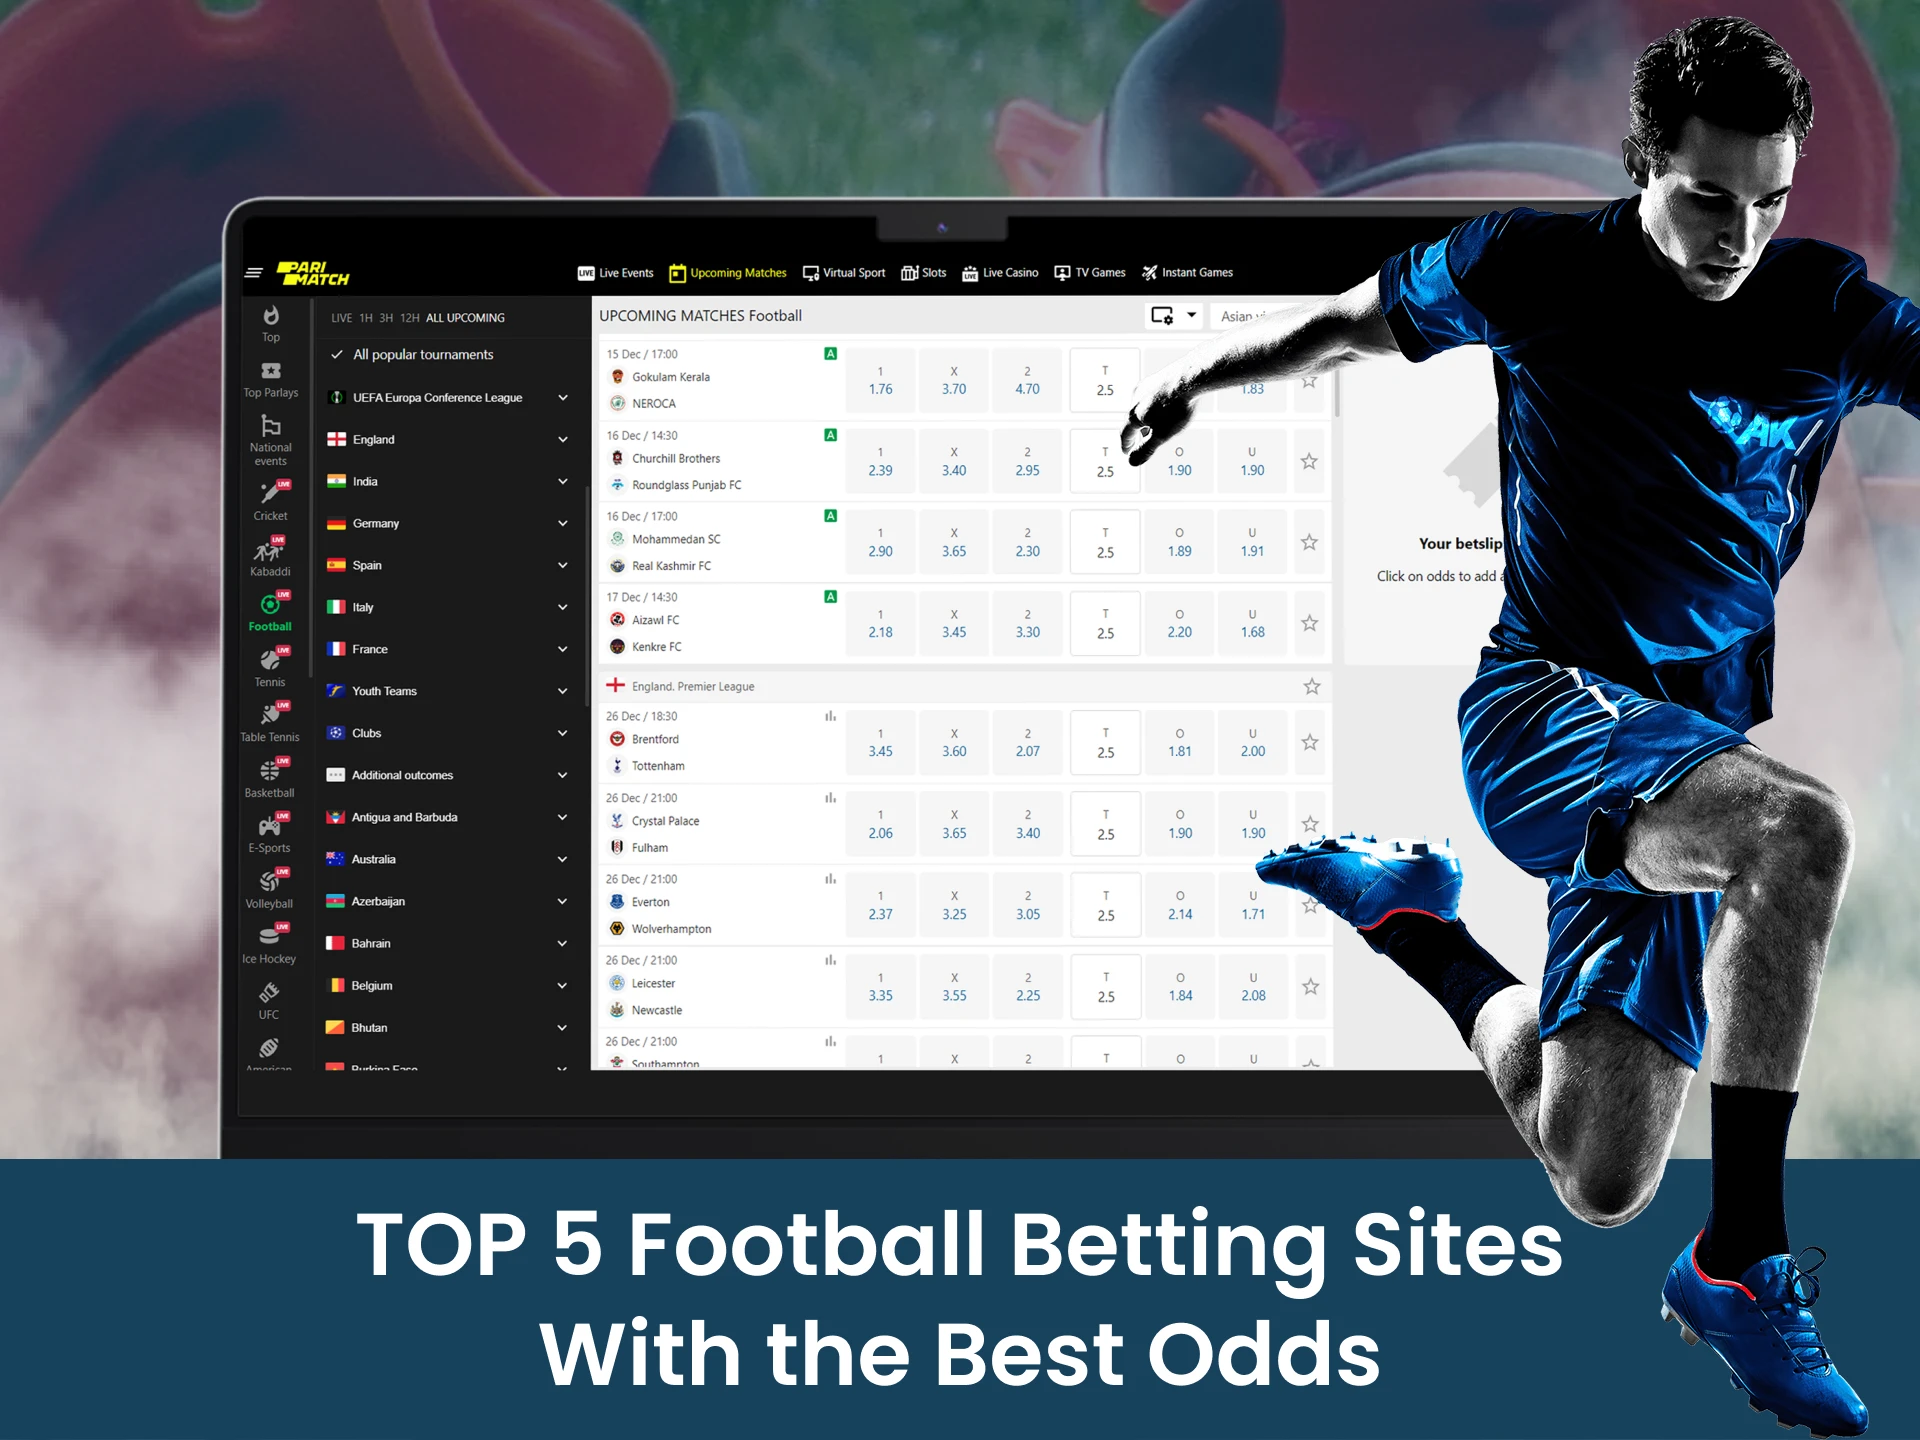 On these sites you will find the best odds on the football betting.